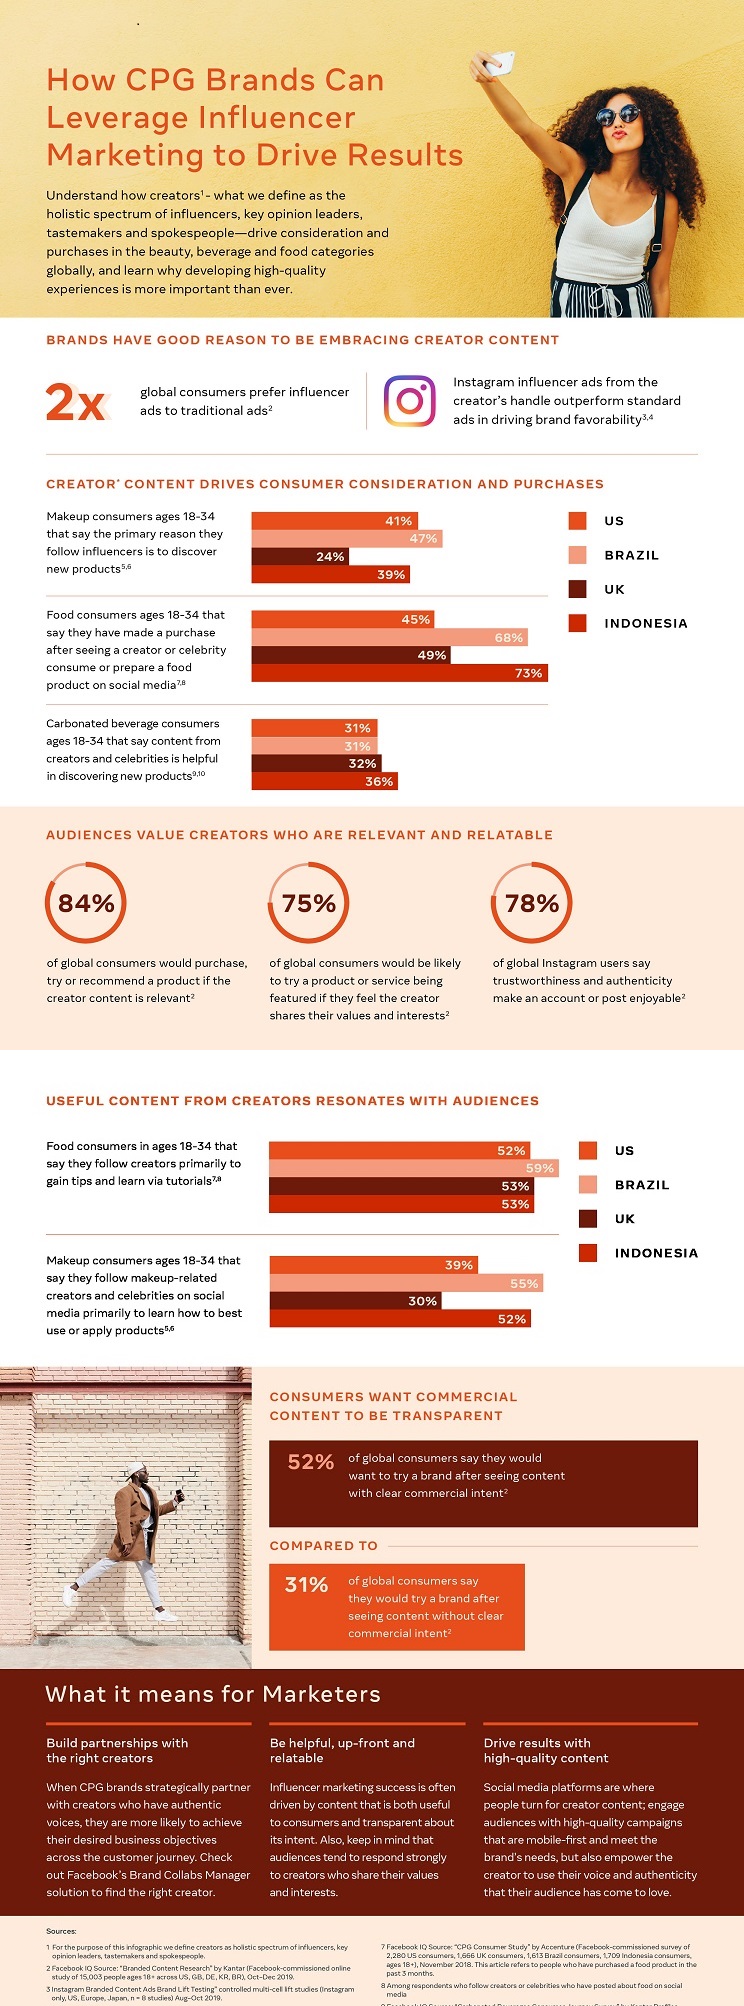 Consumer Packaged Goods (CPG) Brands and Influencer Marketing - Infographic